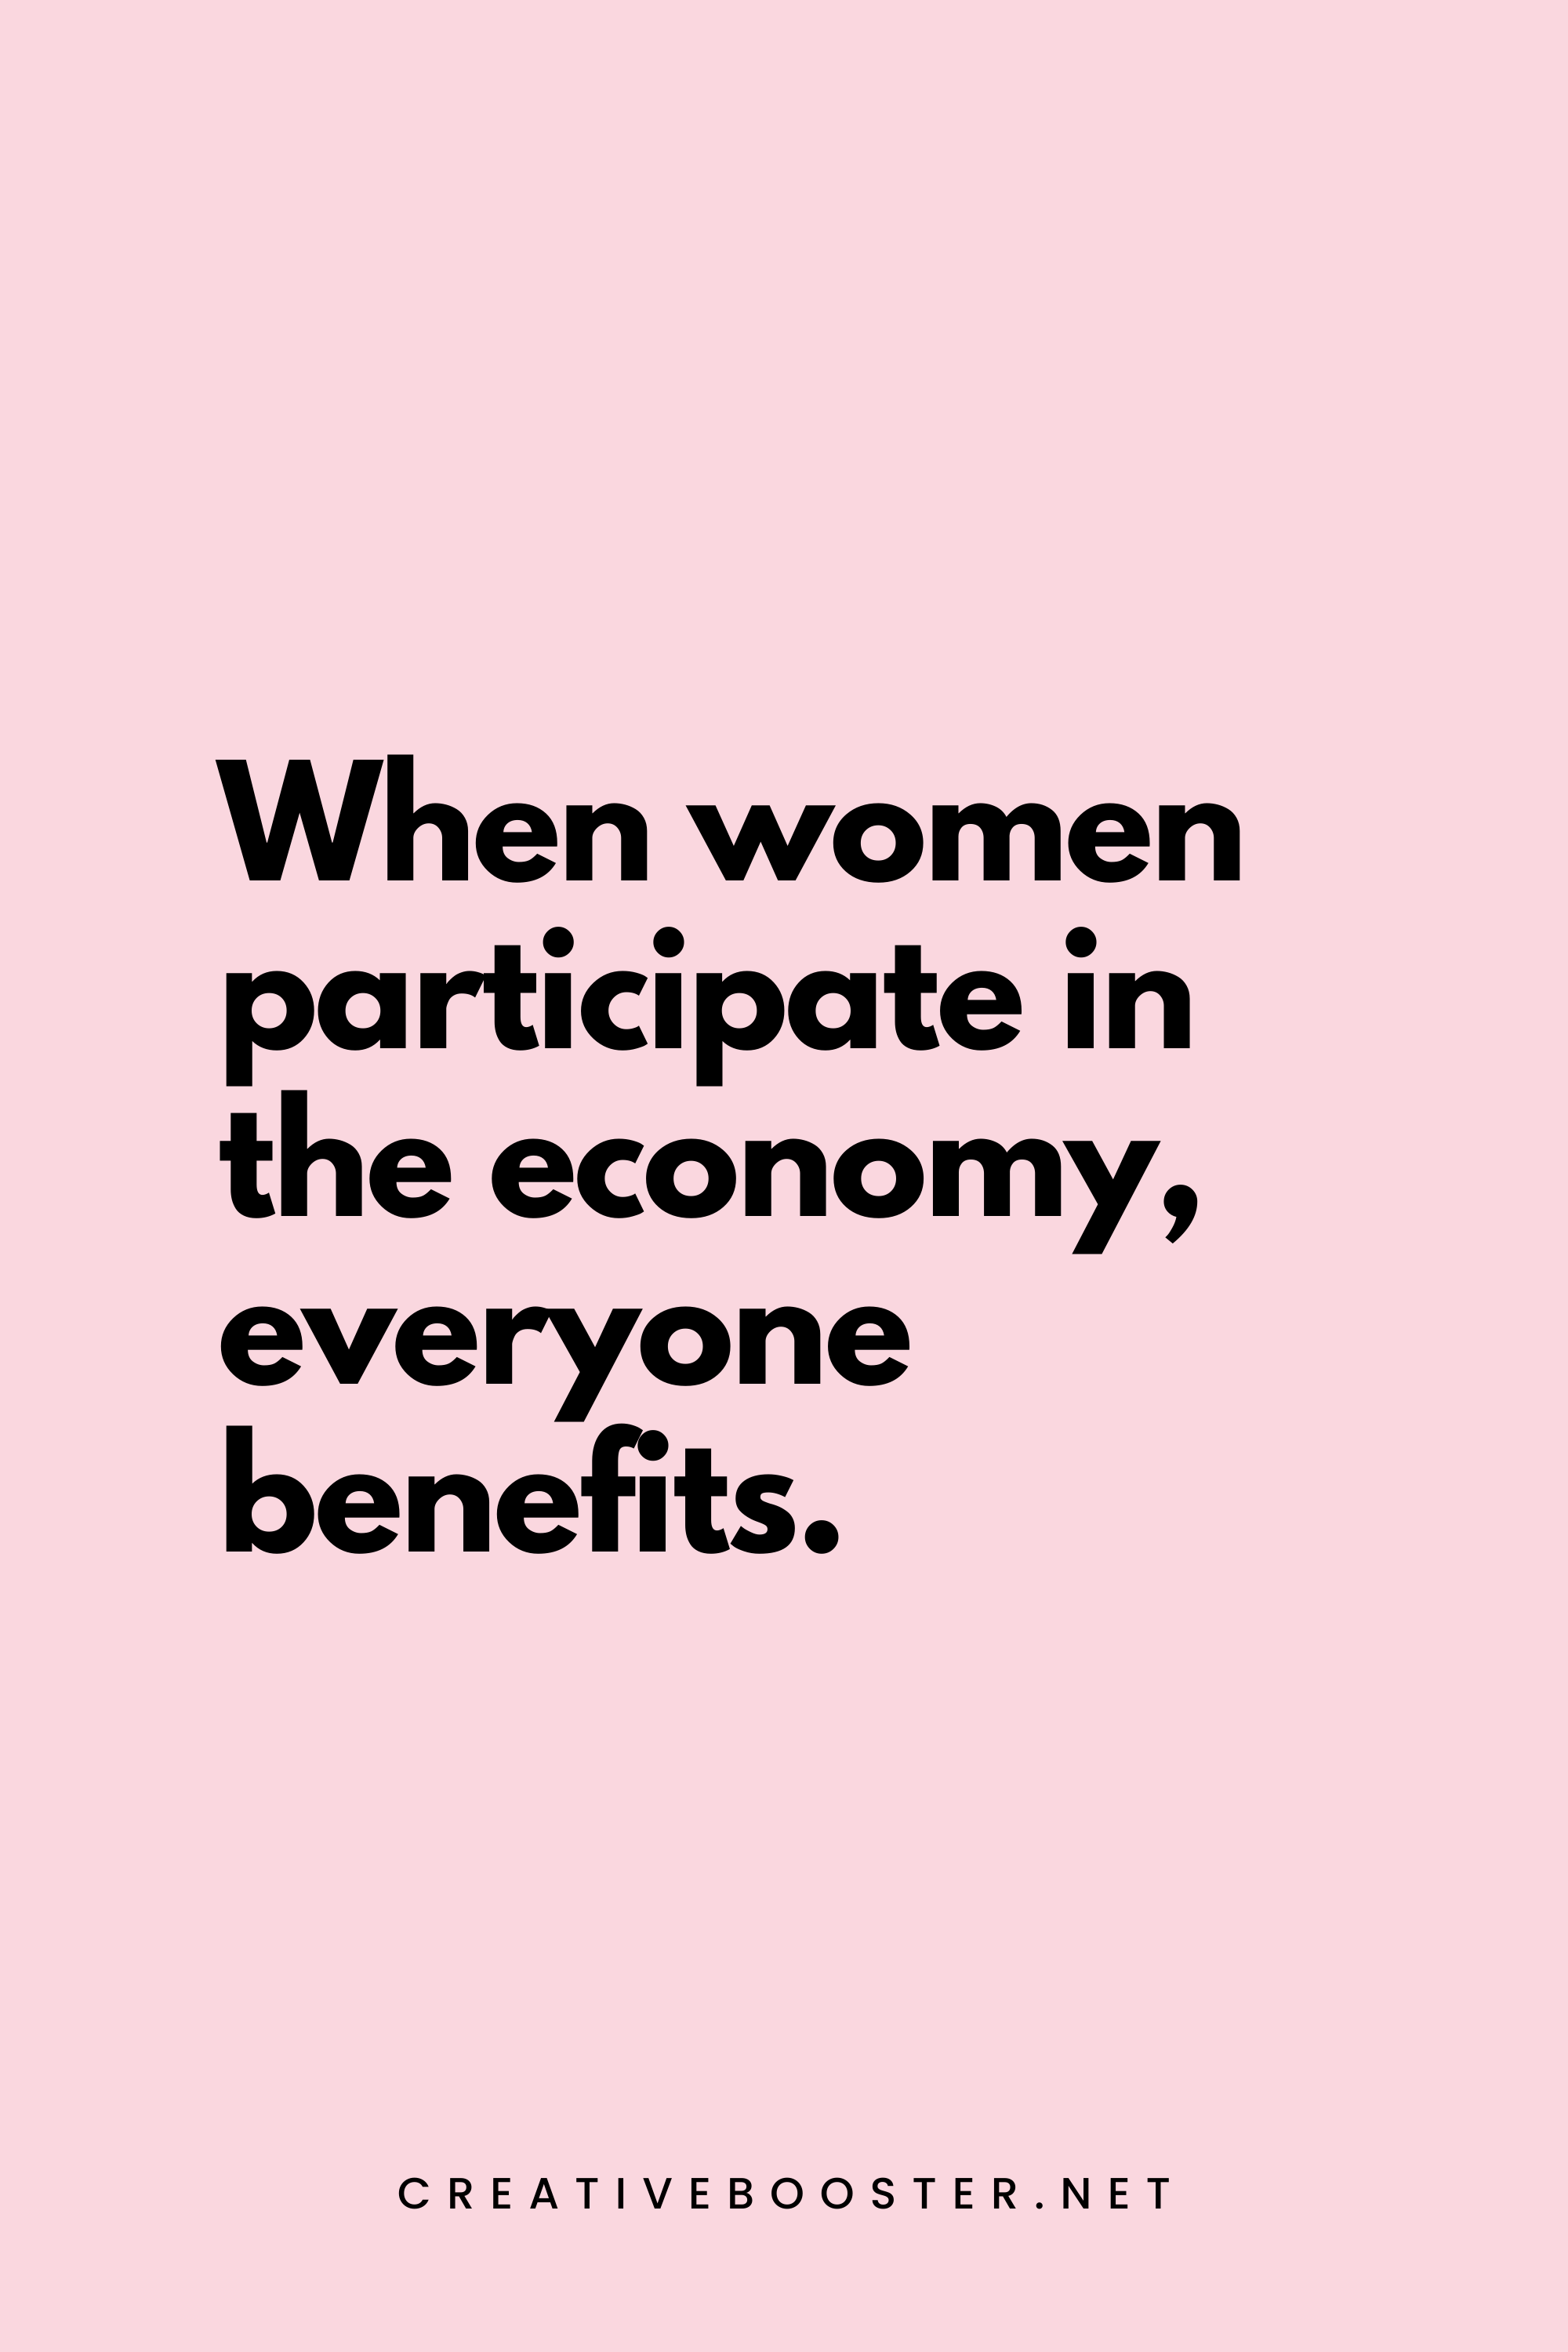 42. When women participate in the economy, everyone benefits. - Hillary Clinton - 4. Financial Freedom Quotes for Women